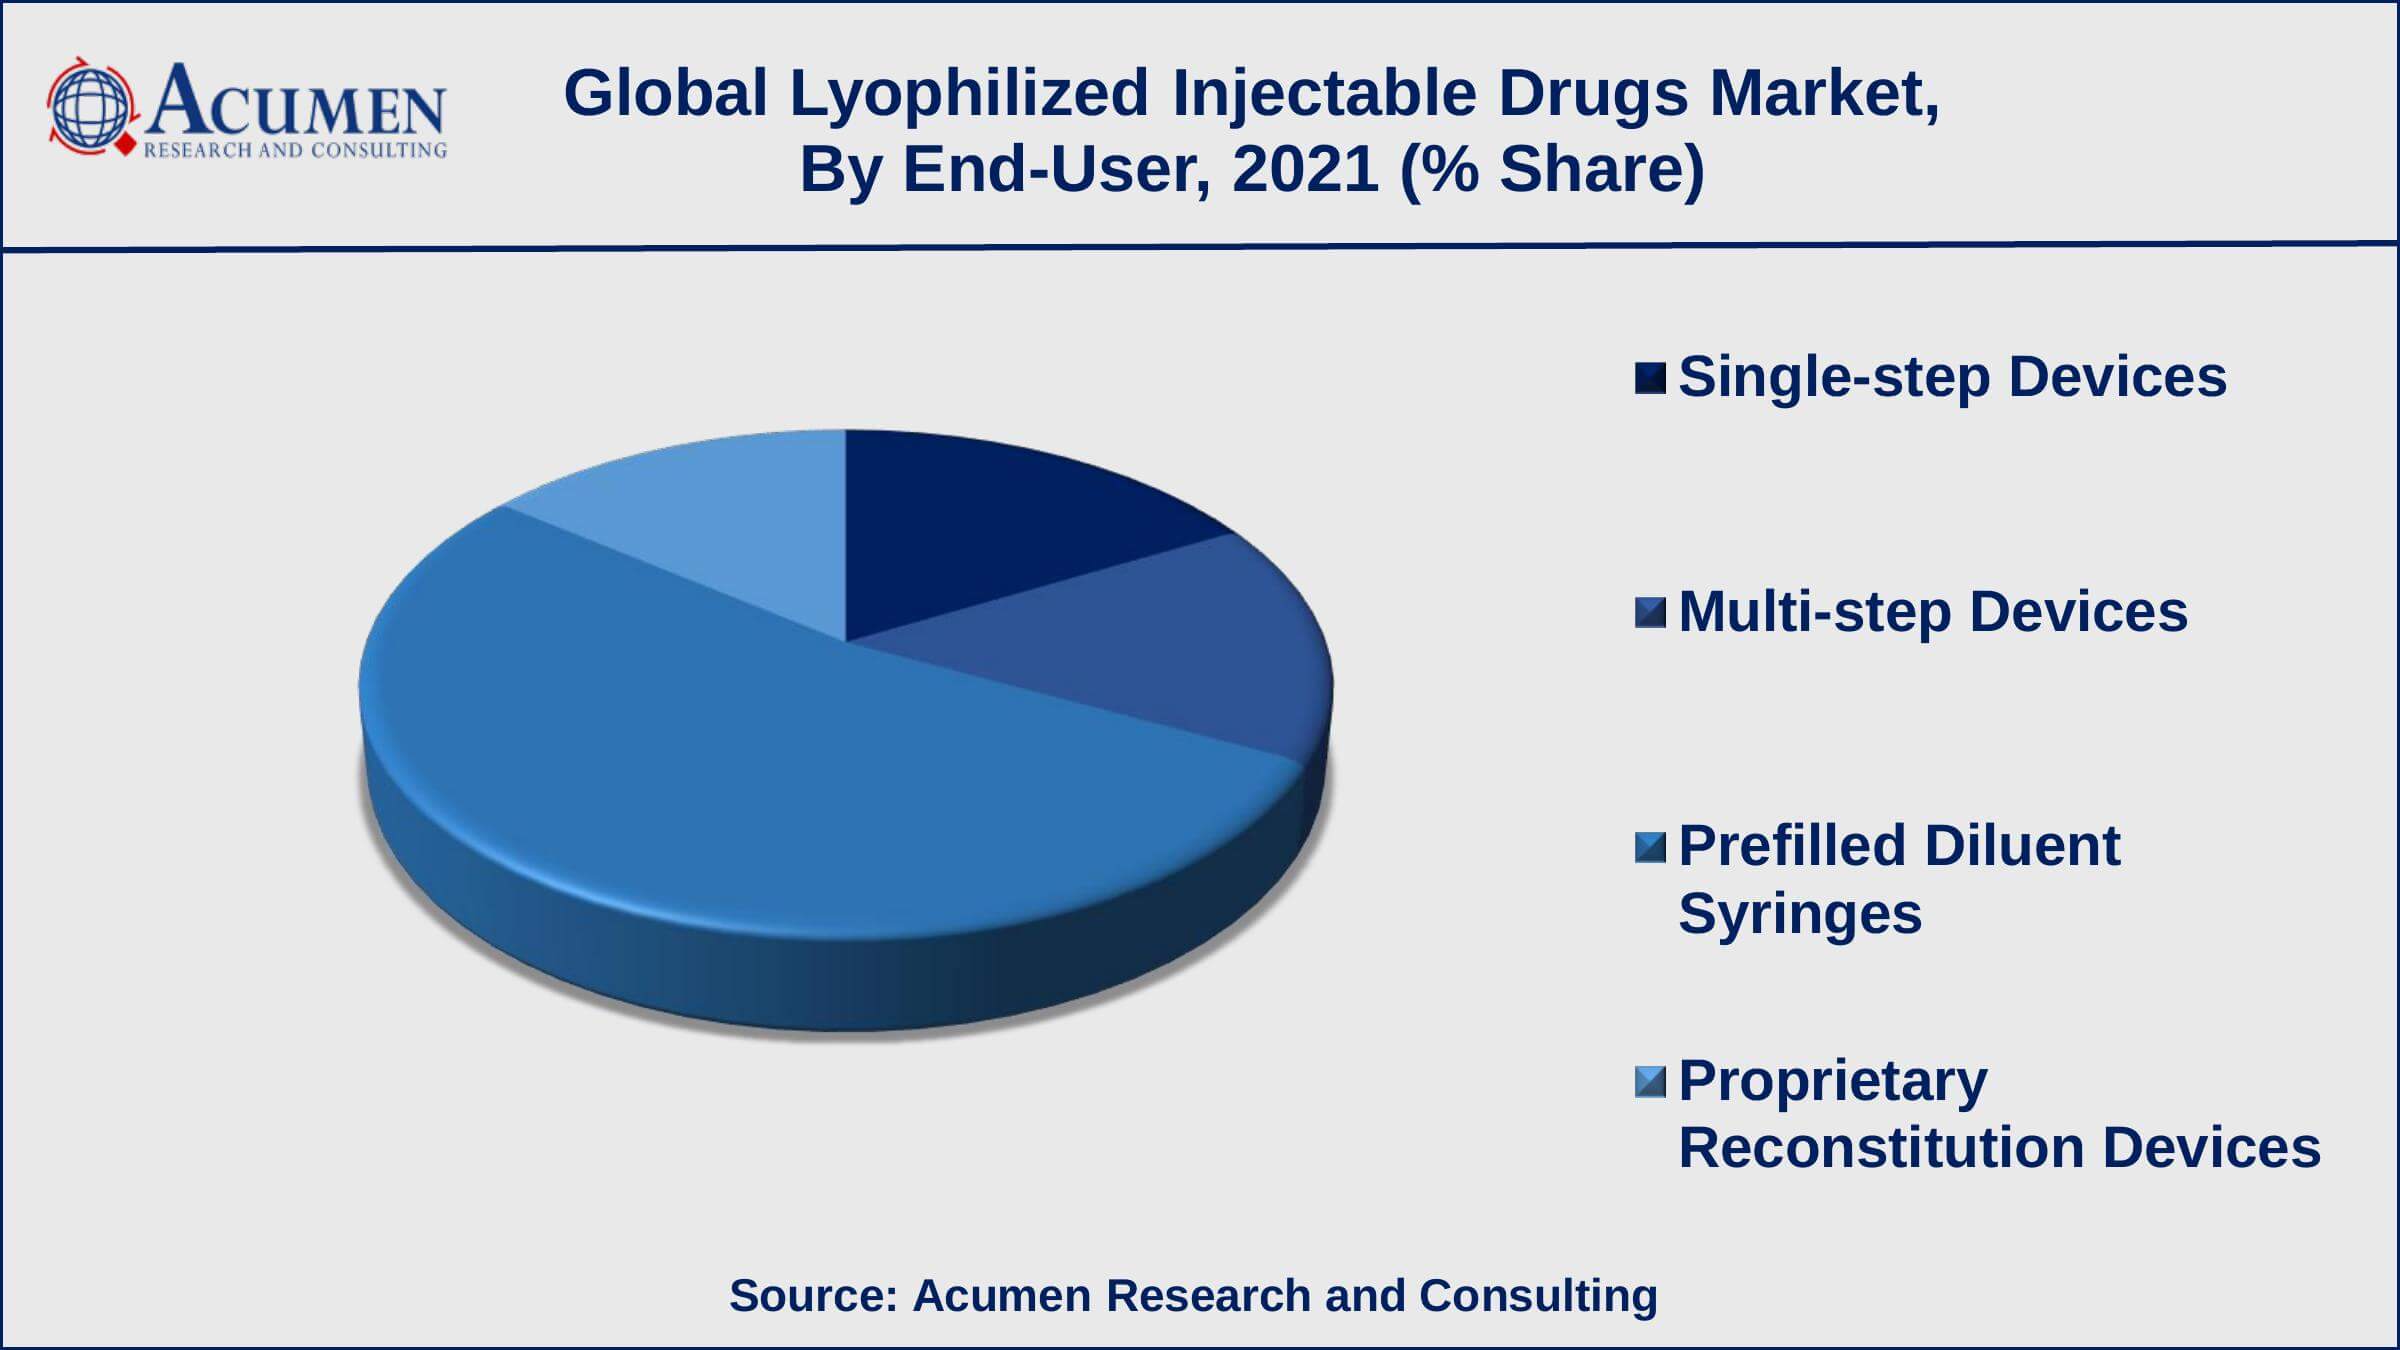 Growth in contract manufacturing services is a popular lyophilized injectable drugs market trend that fuels the industry demand